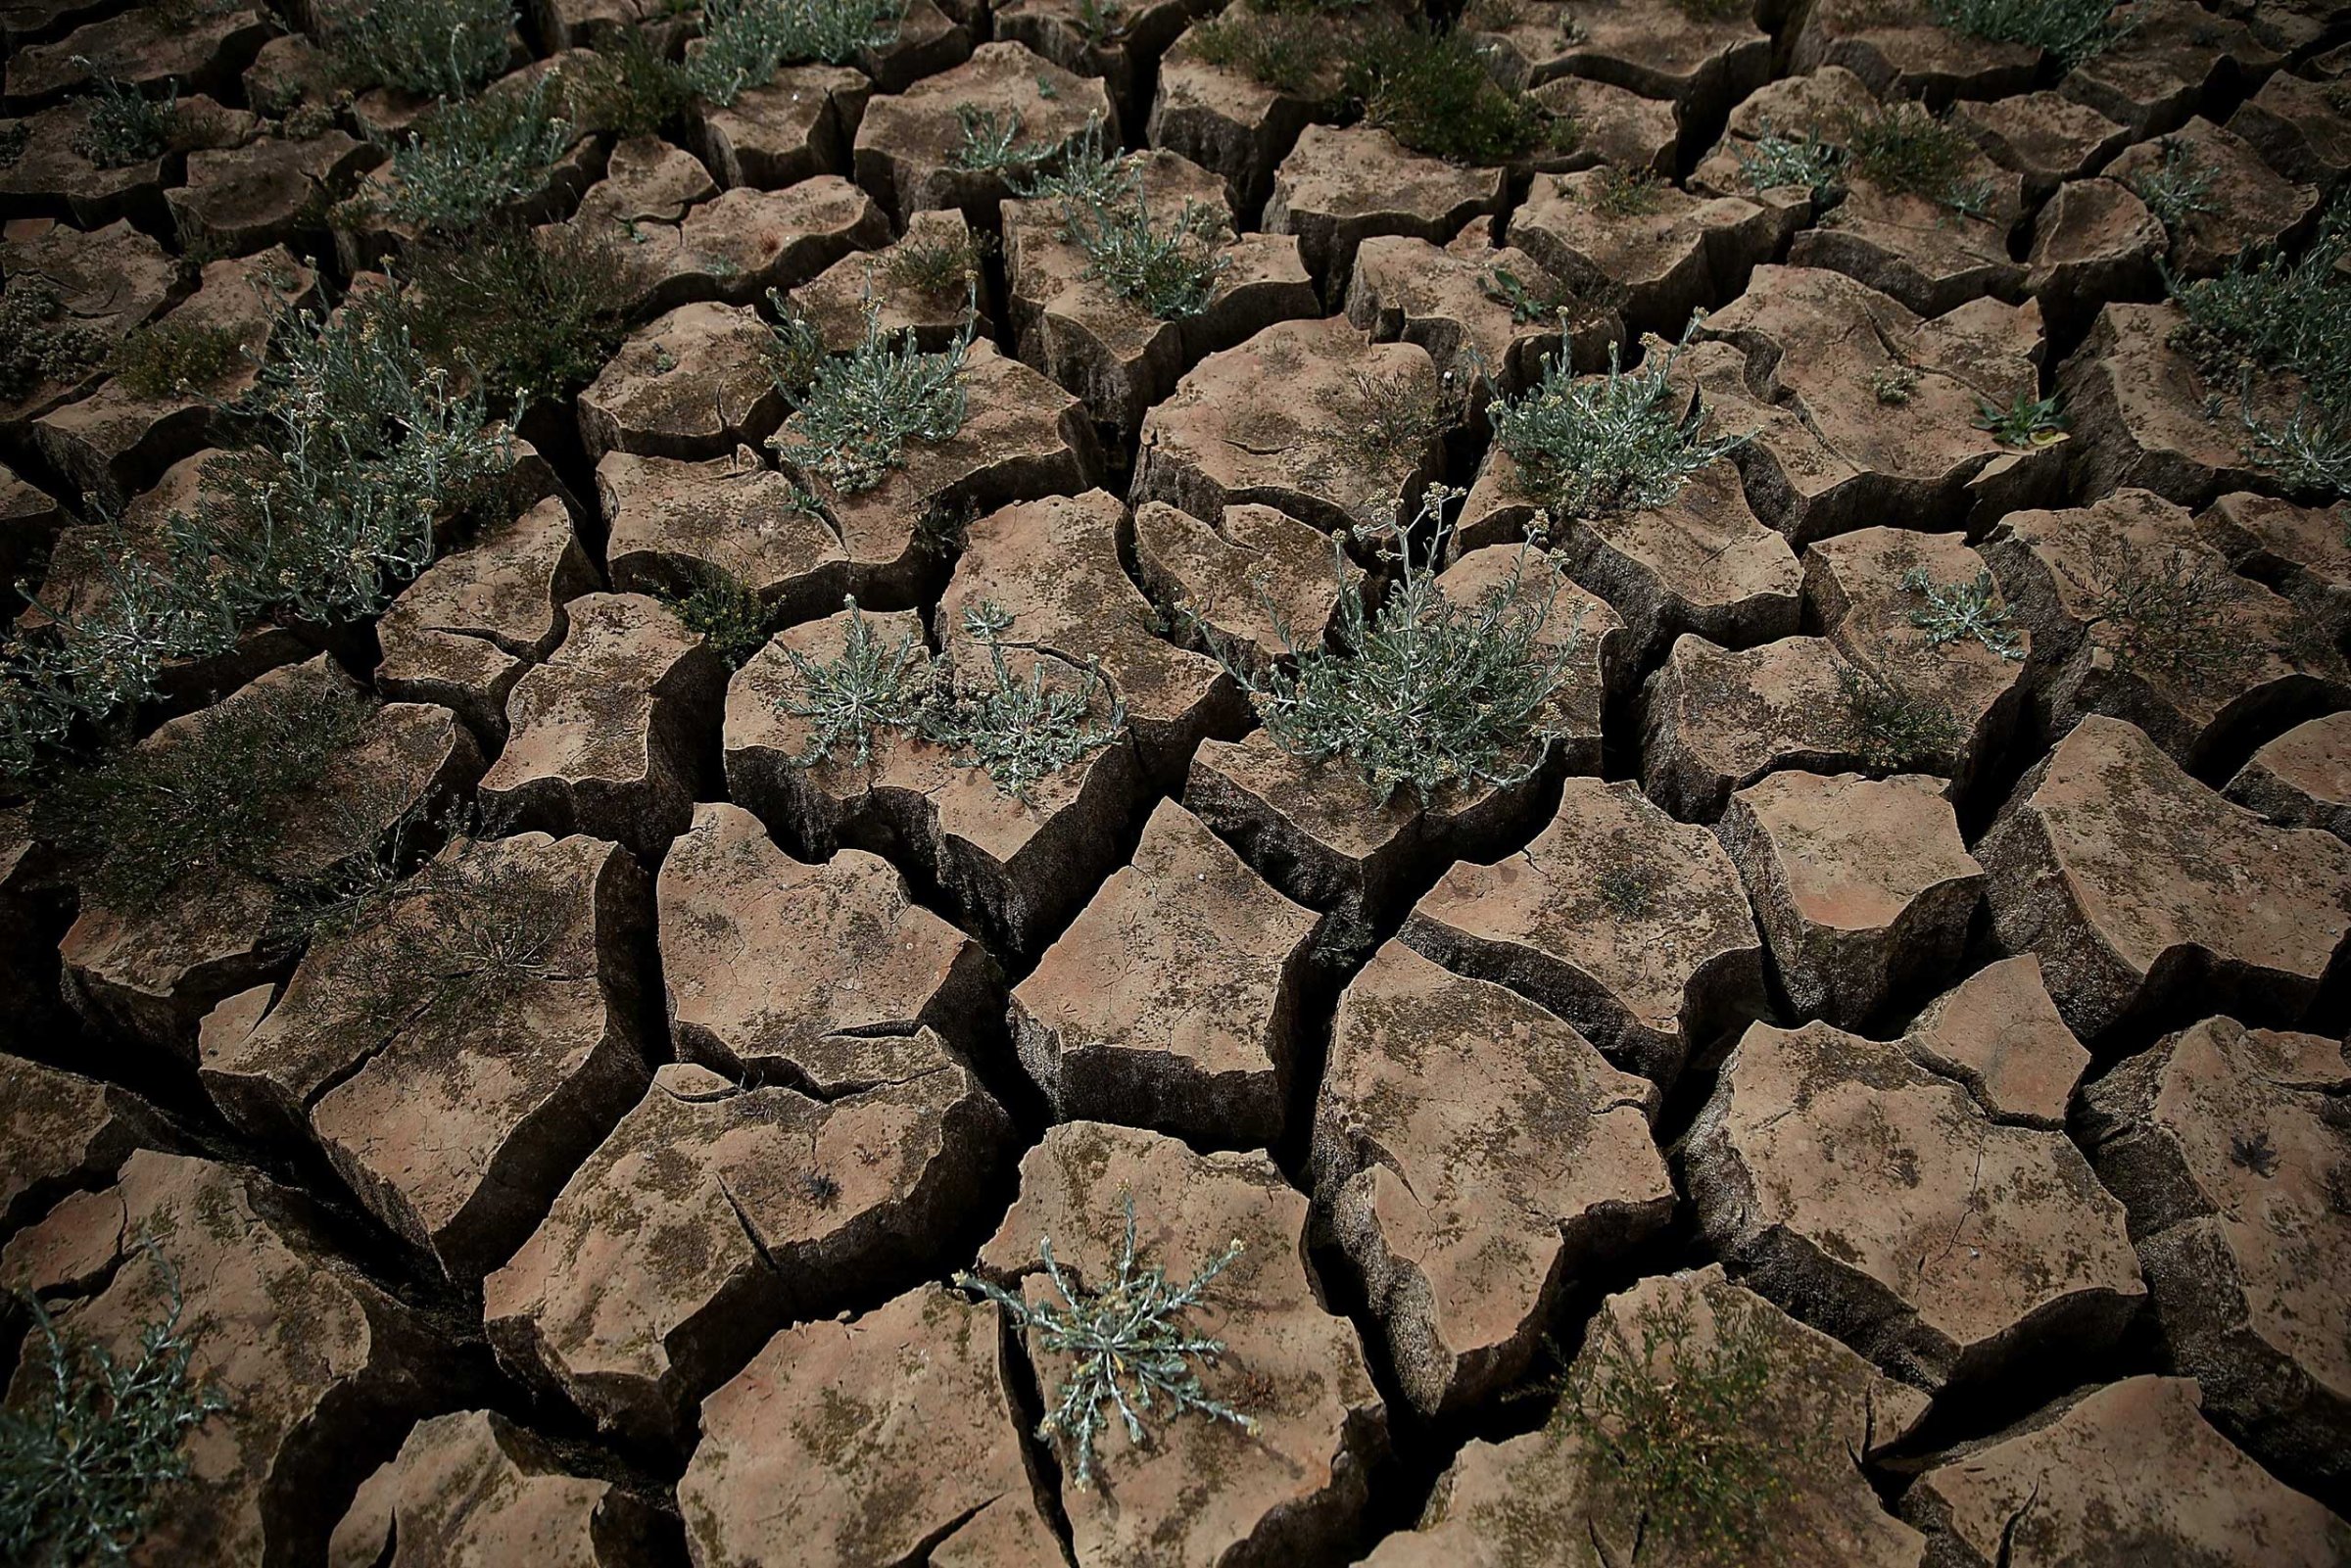 Weeds grow in dry cracked earth that used to be the bottom of Lake McClure in La Grange, California on March 24, 2015.